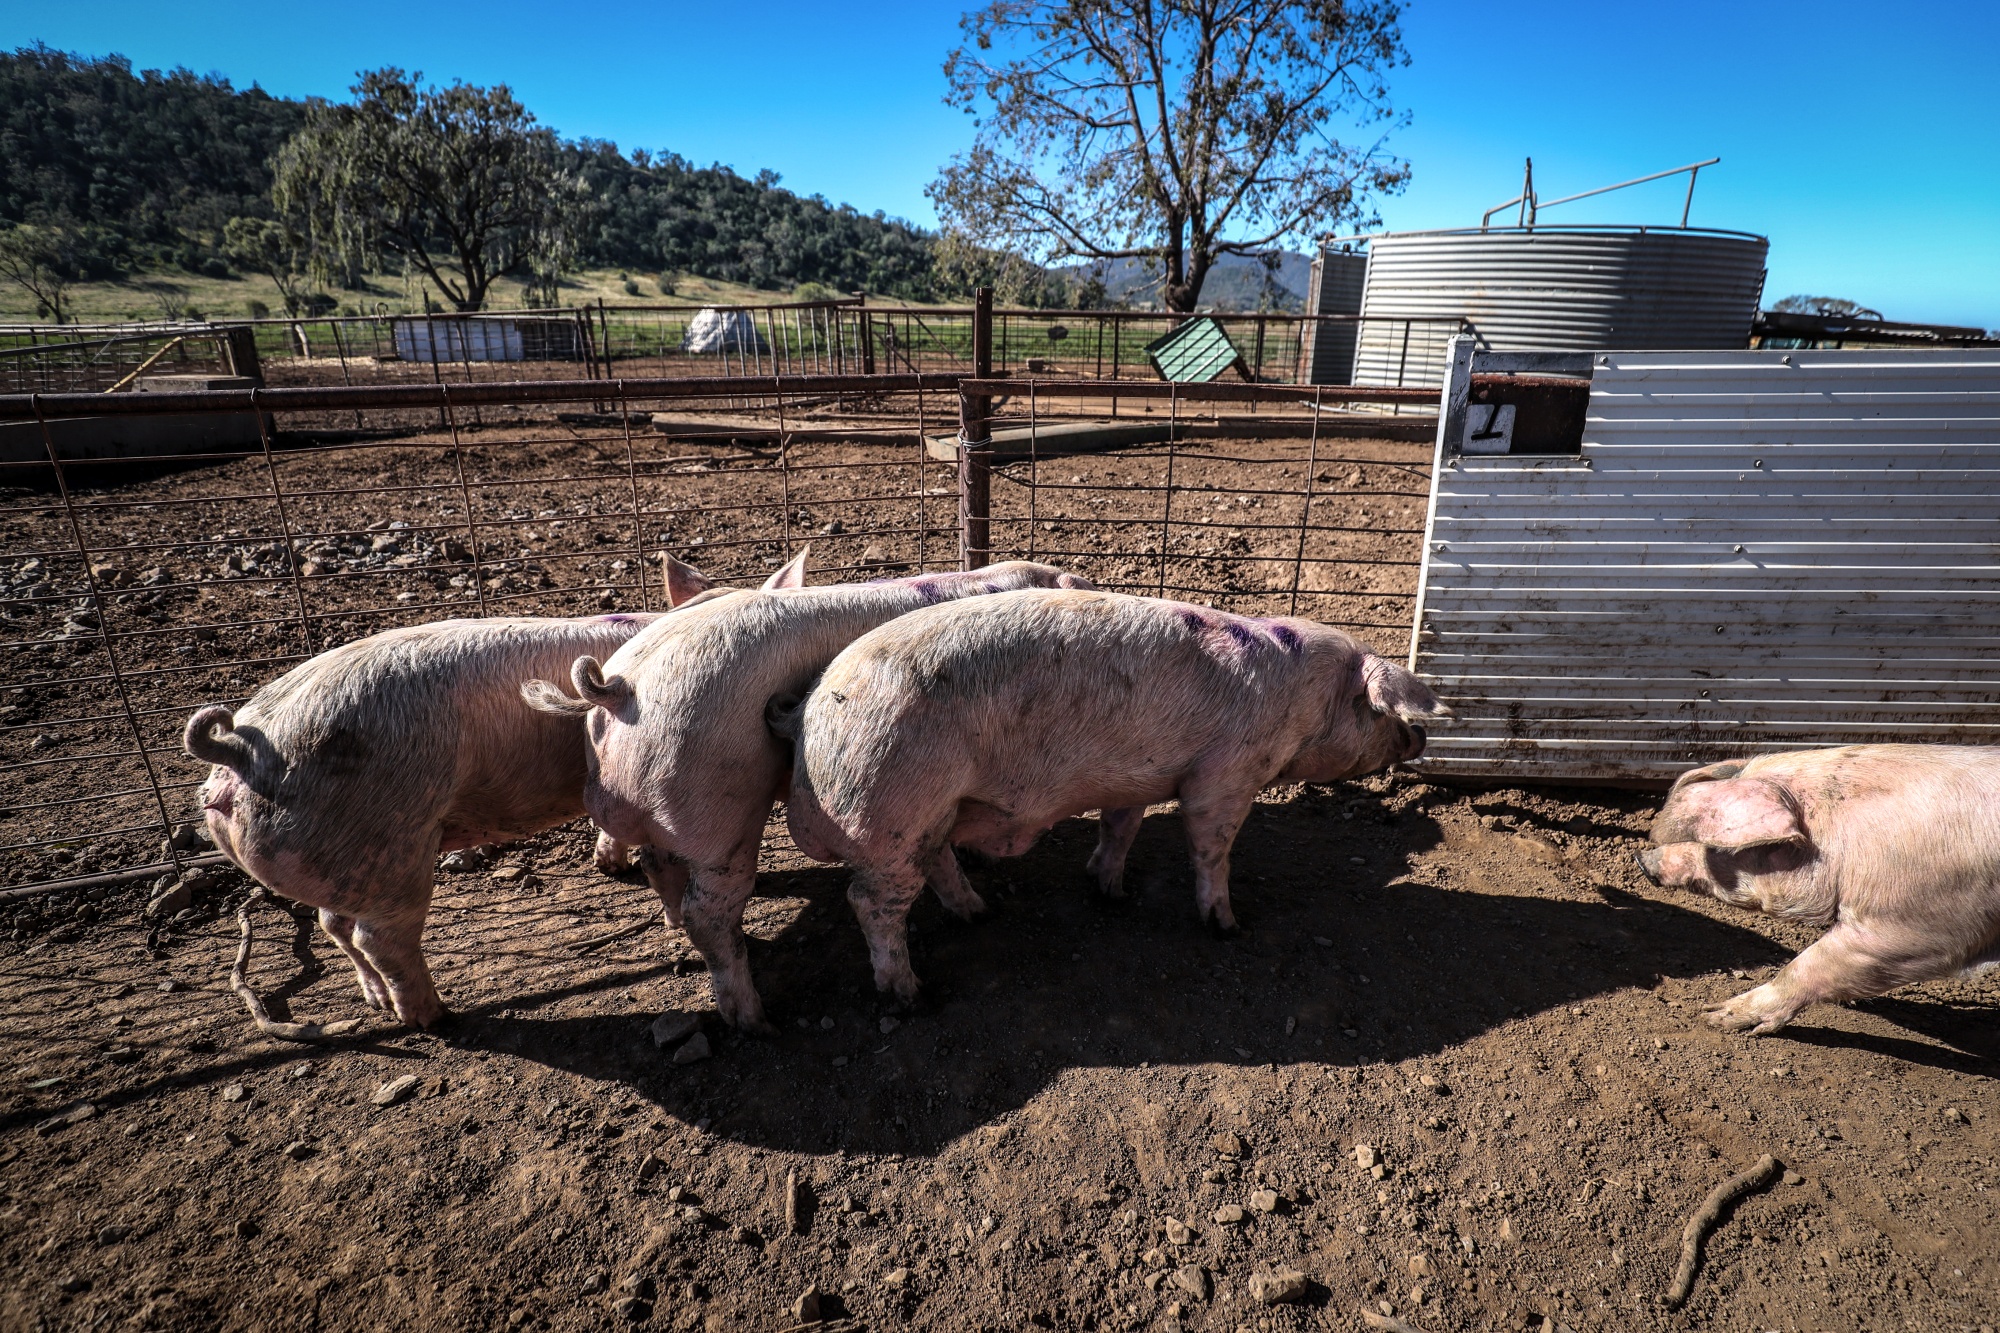 Operations at a New South Wales Free Range Pig Farm Amid Souring Ties With China 